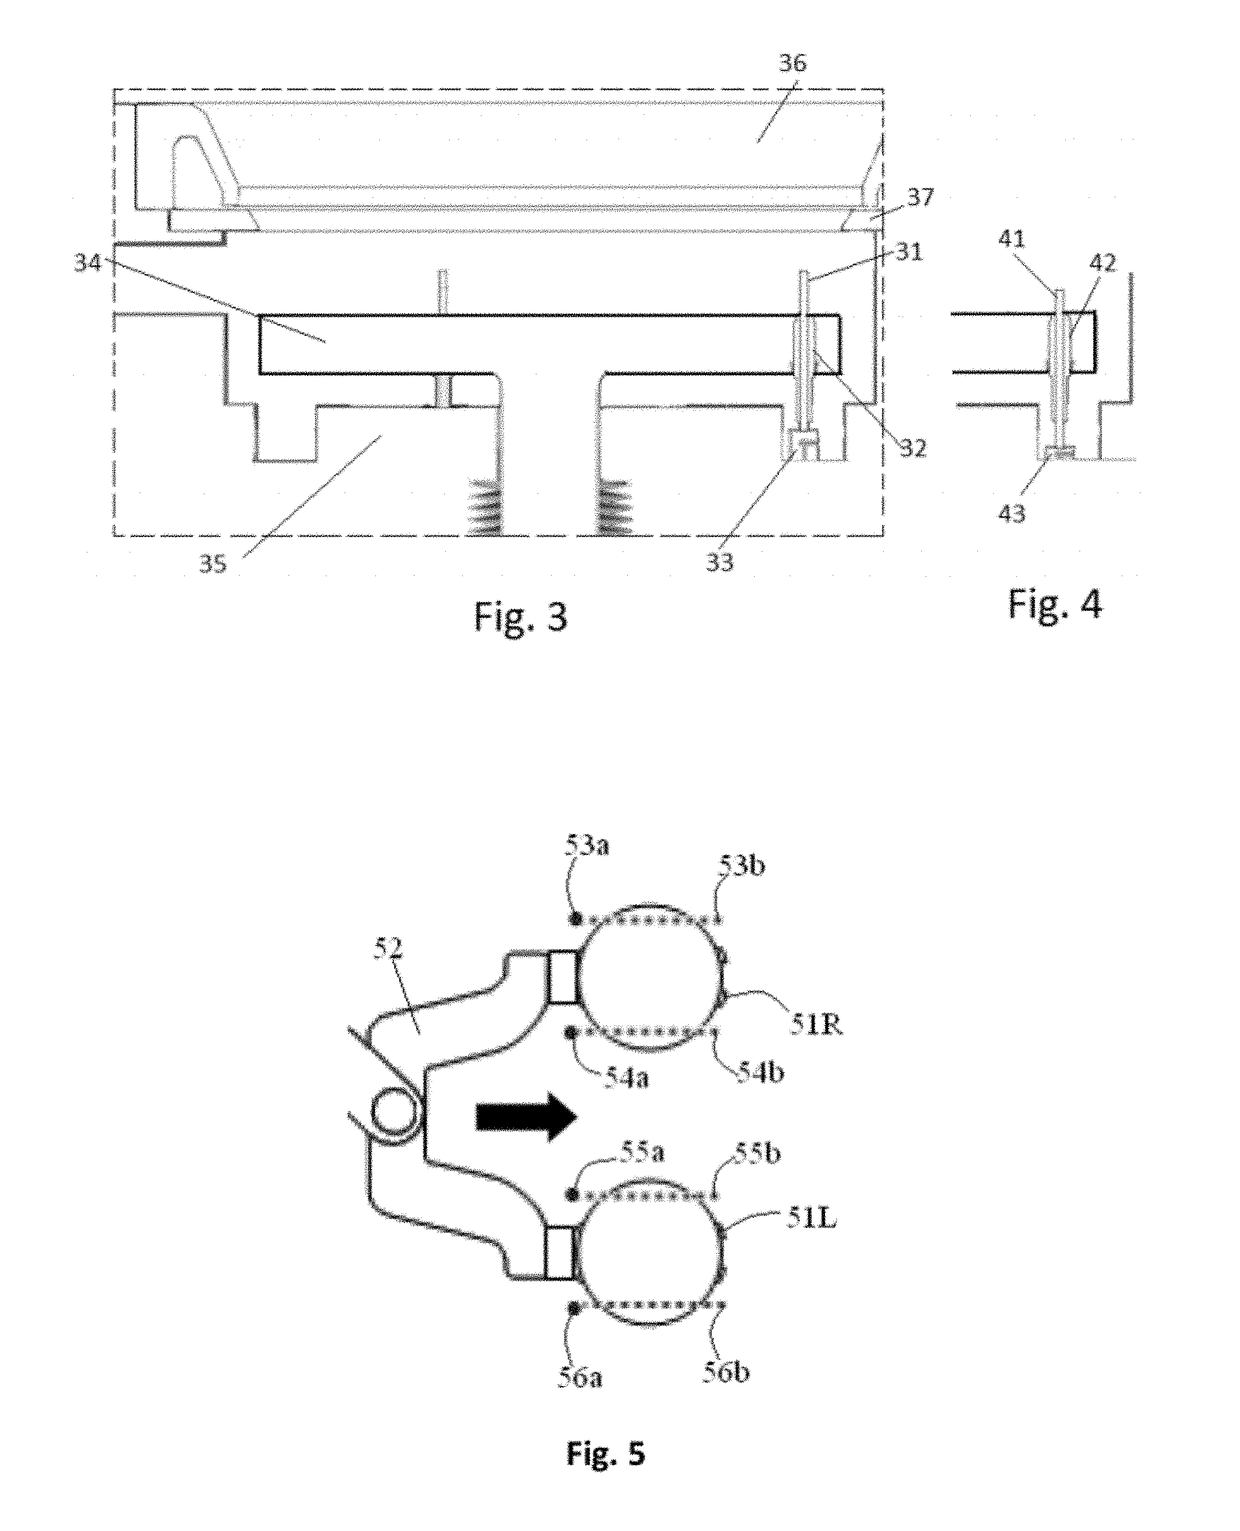 Method for positioning wafers in multiple wafer transport